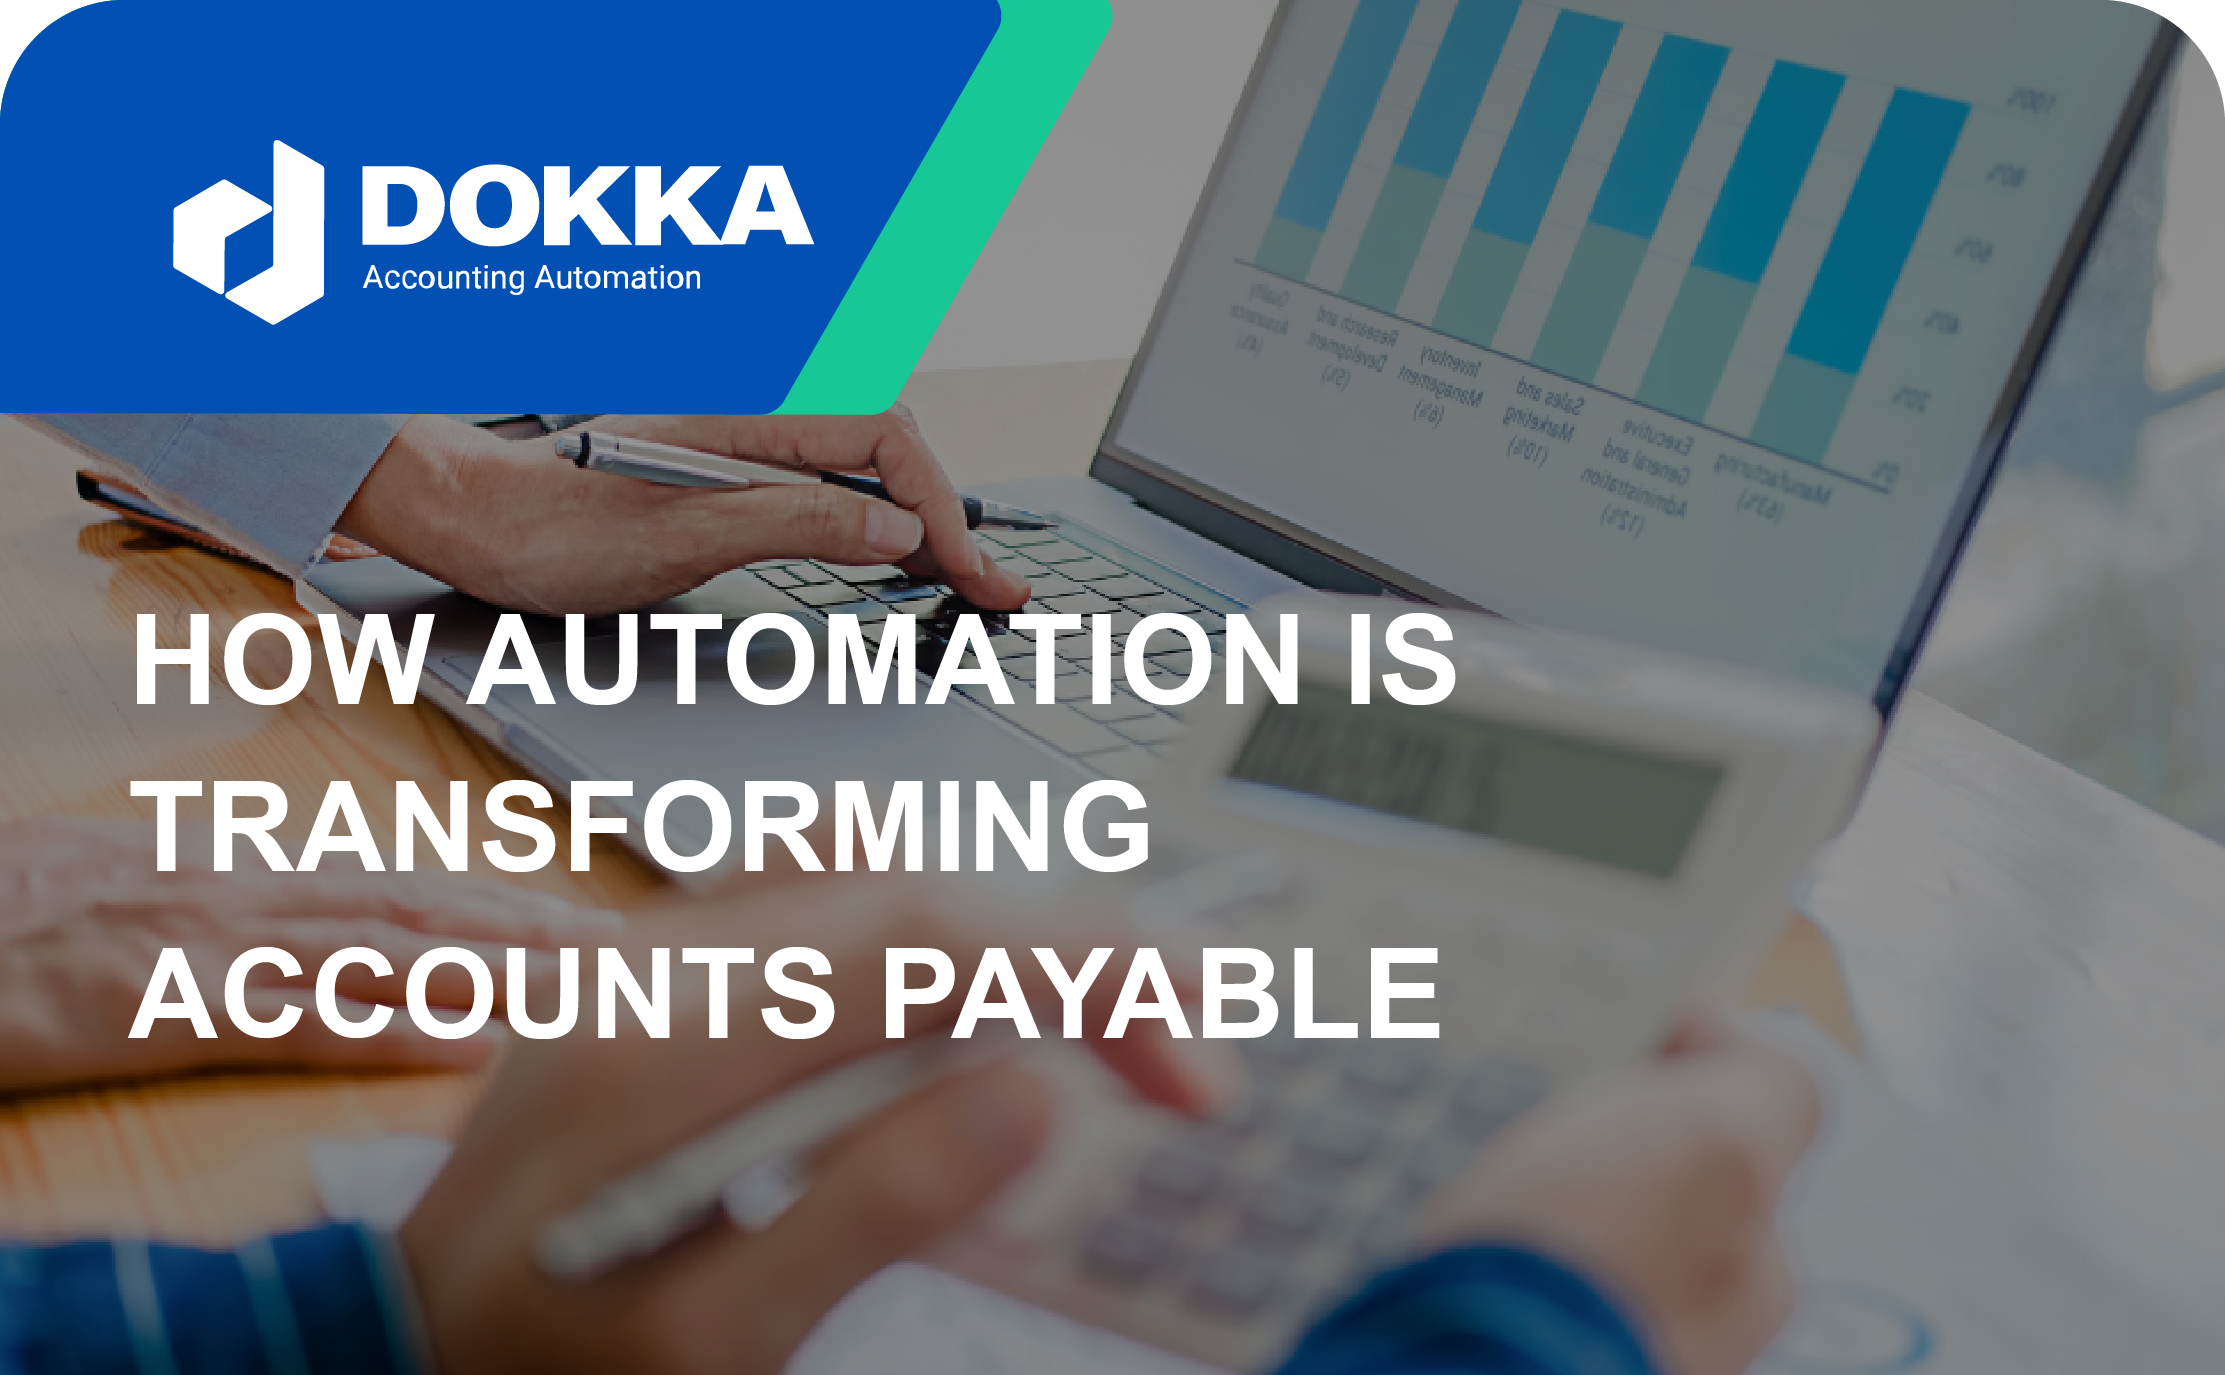 How Automation is Transforming Accounts Payable